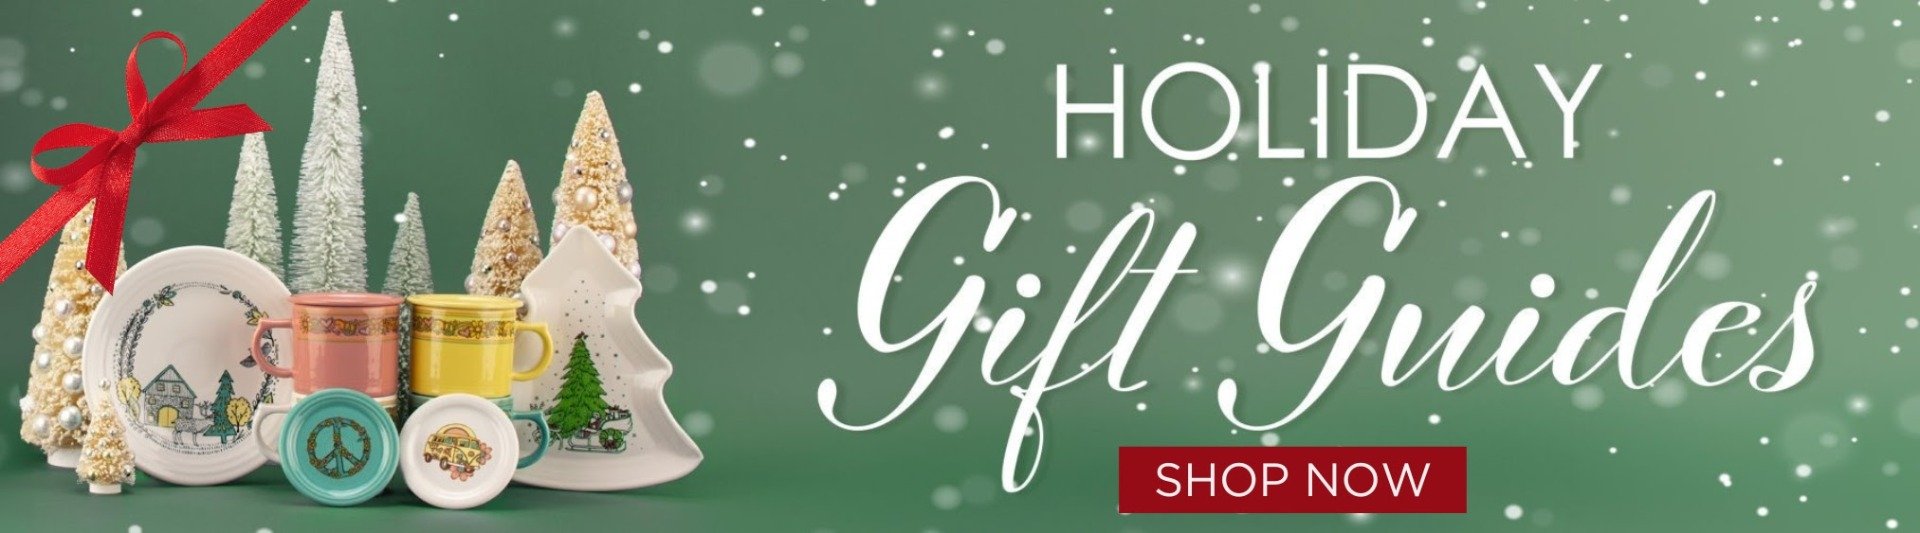 Holiday Gift Guides Shop Now